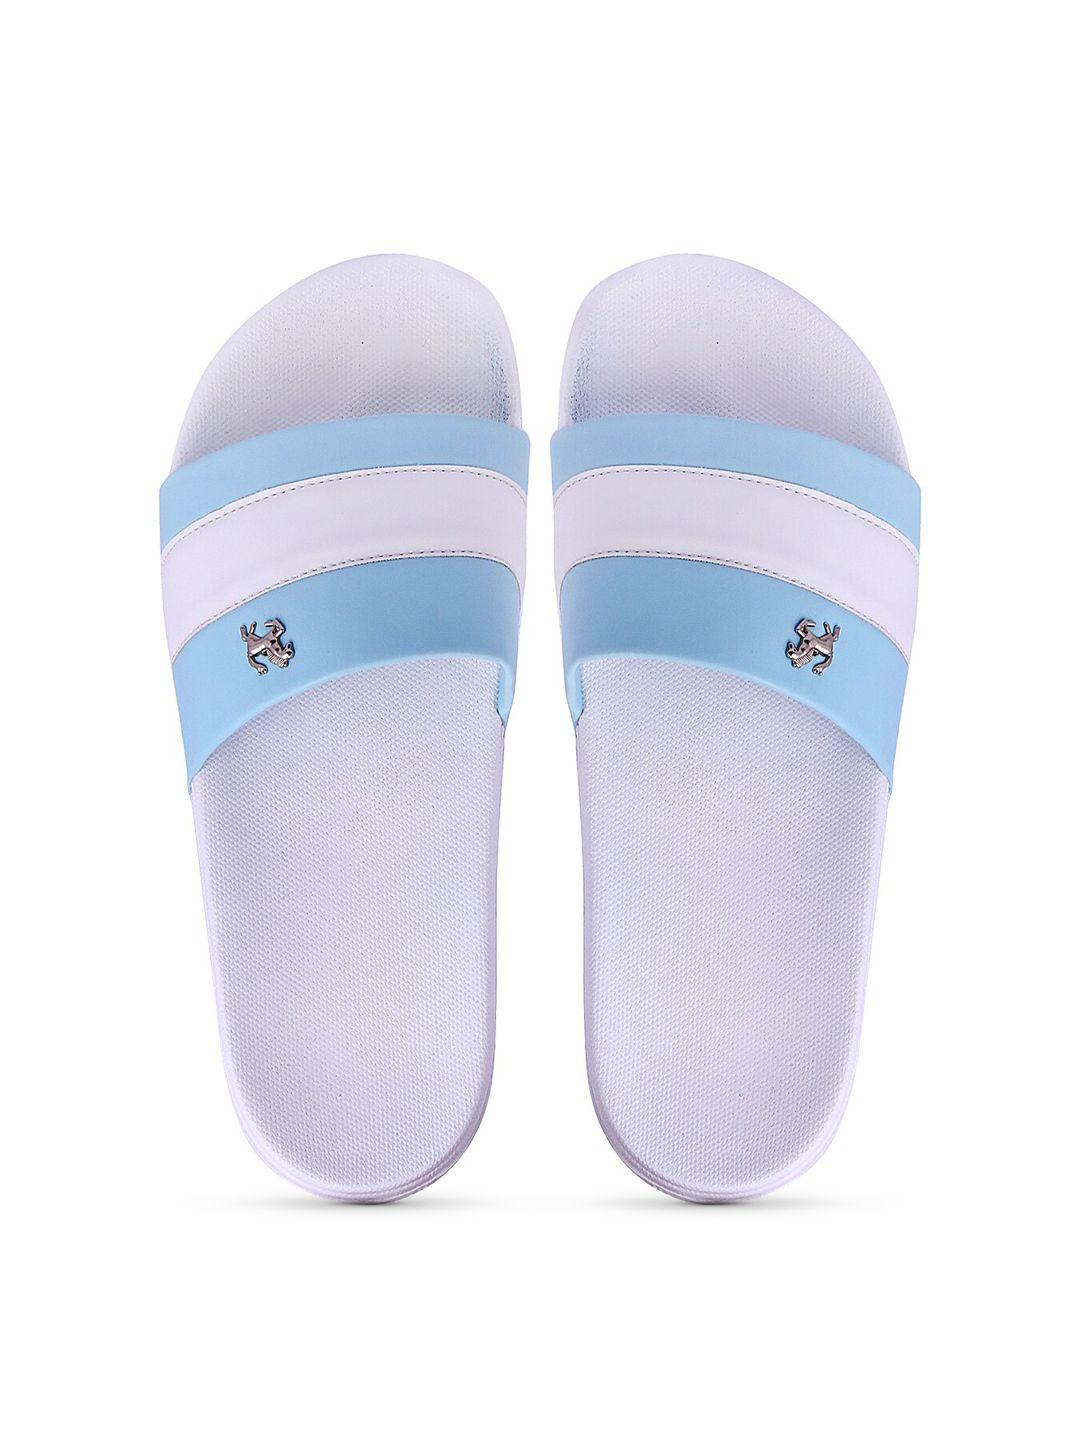 pery pao men turquoise blue & white striped rubber sliders